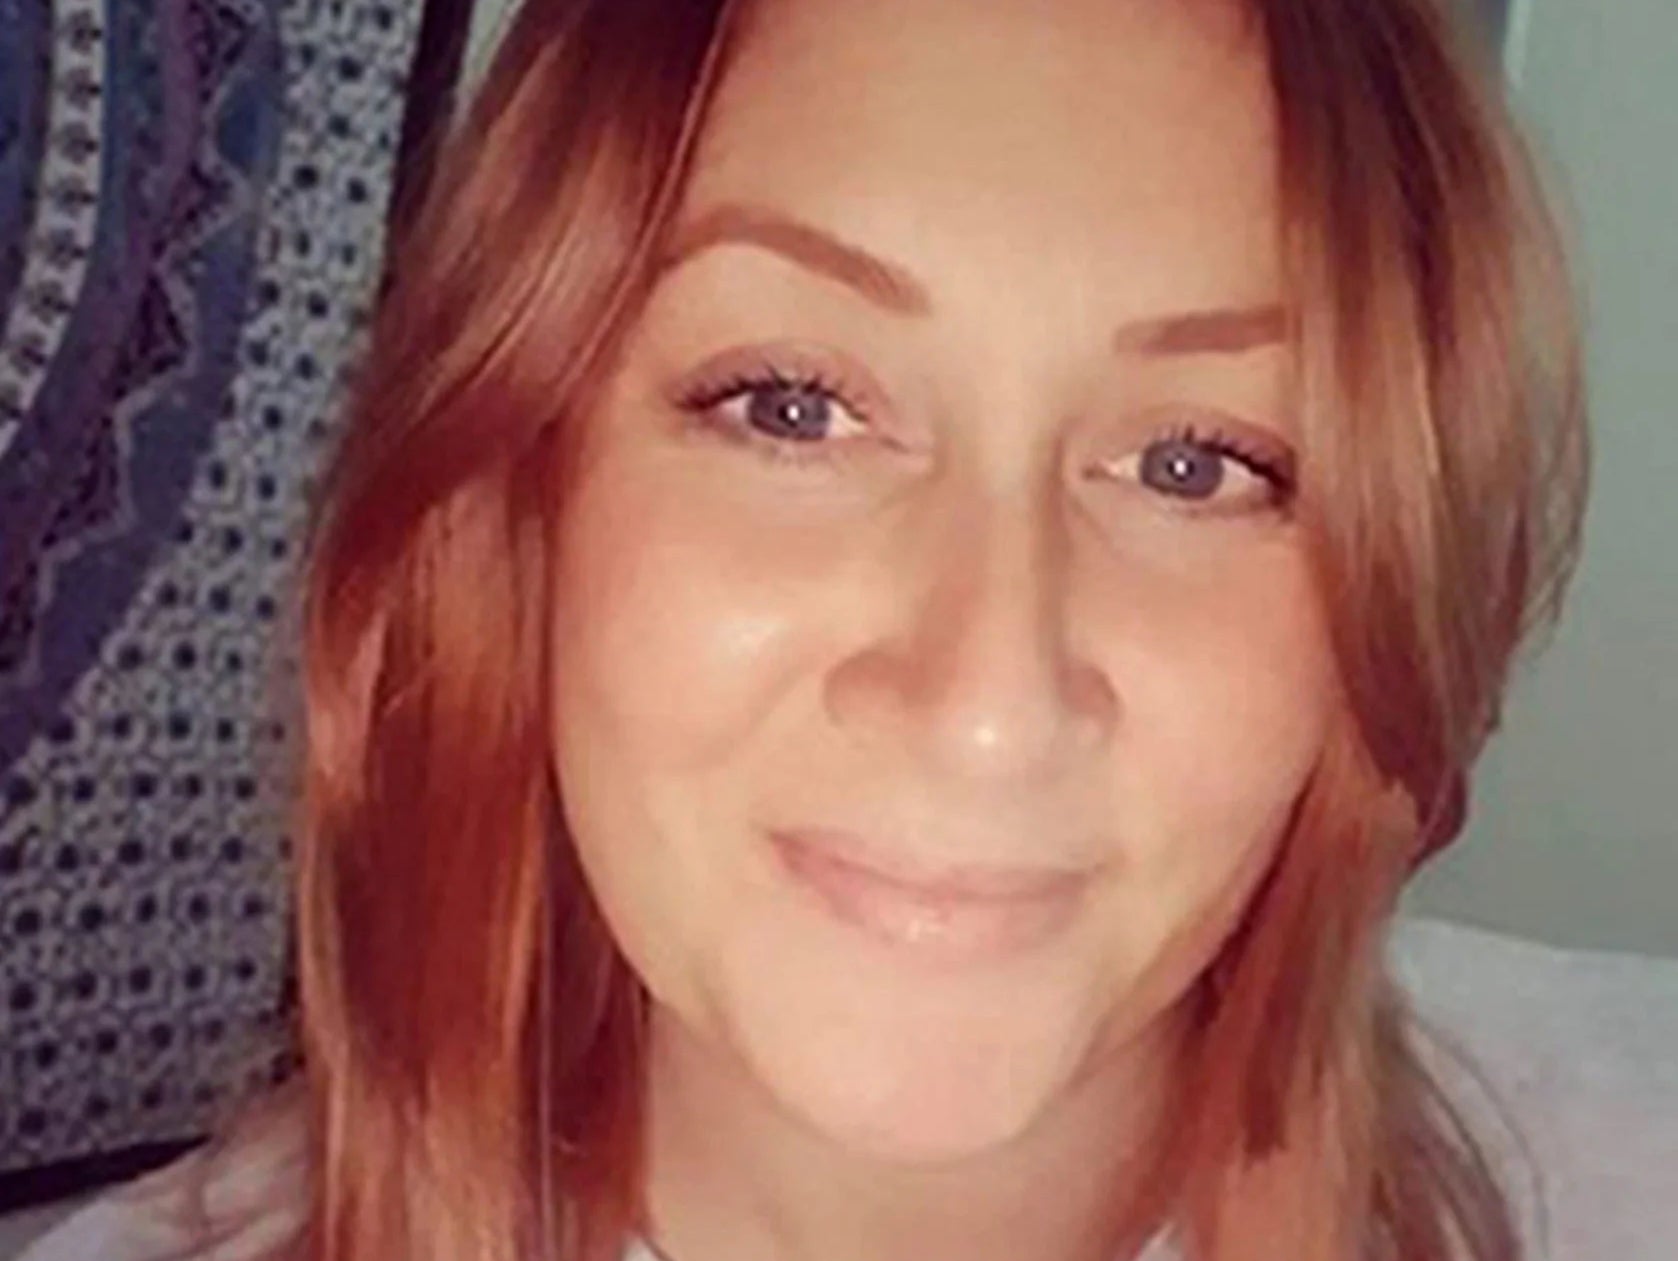 A man is under arrest as police search for Katie Kenyon, who went missing on Friday